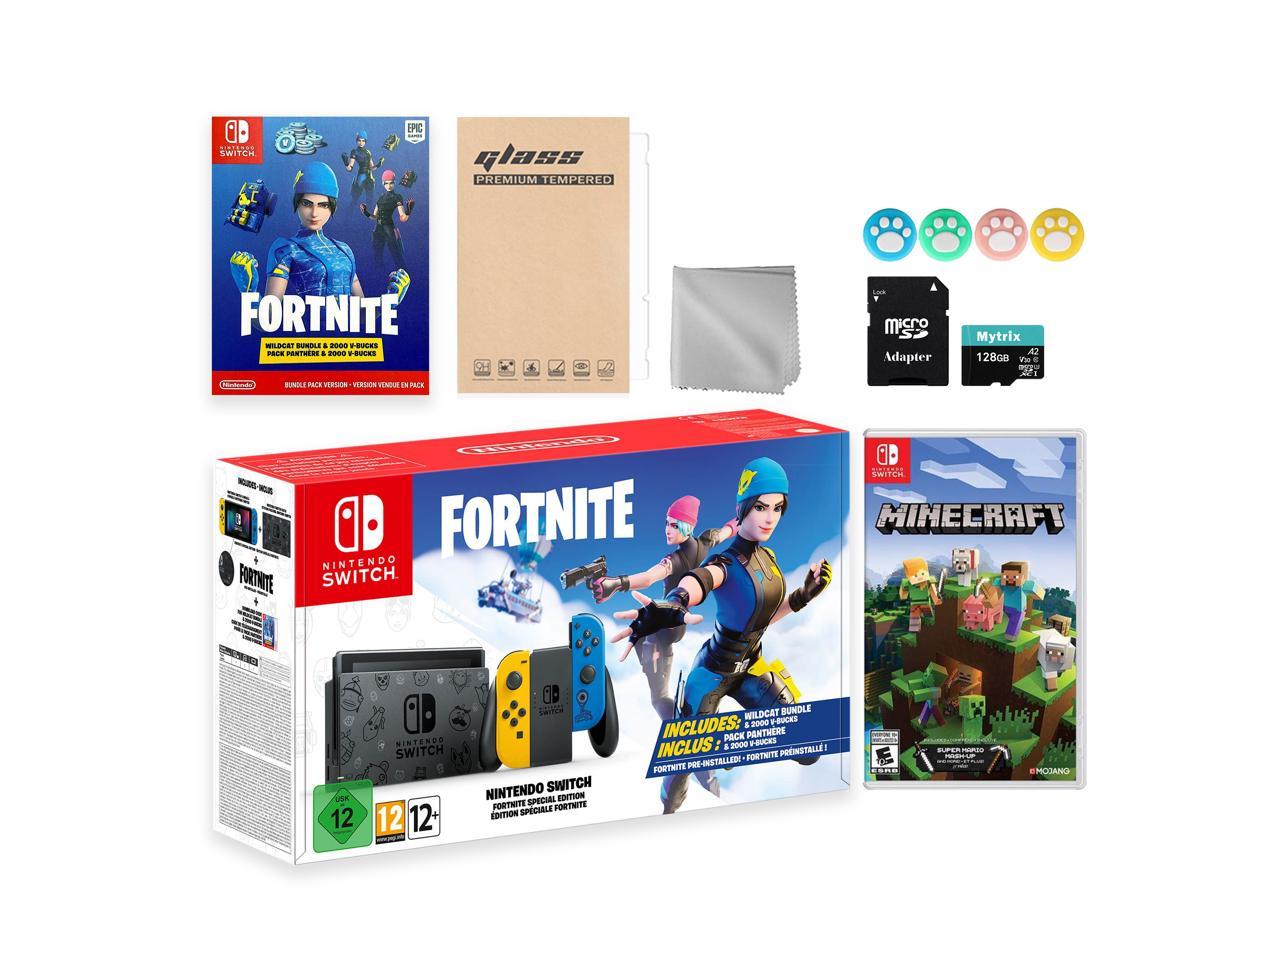 Nintendo Switch Fortnite Wildcat Limited Console Set Epic Wildcat Outfits 00 V Bucks Bundle With Minecraft And Mytrix Accessories Newegg Com